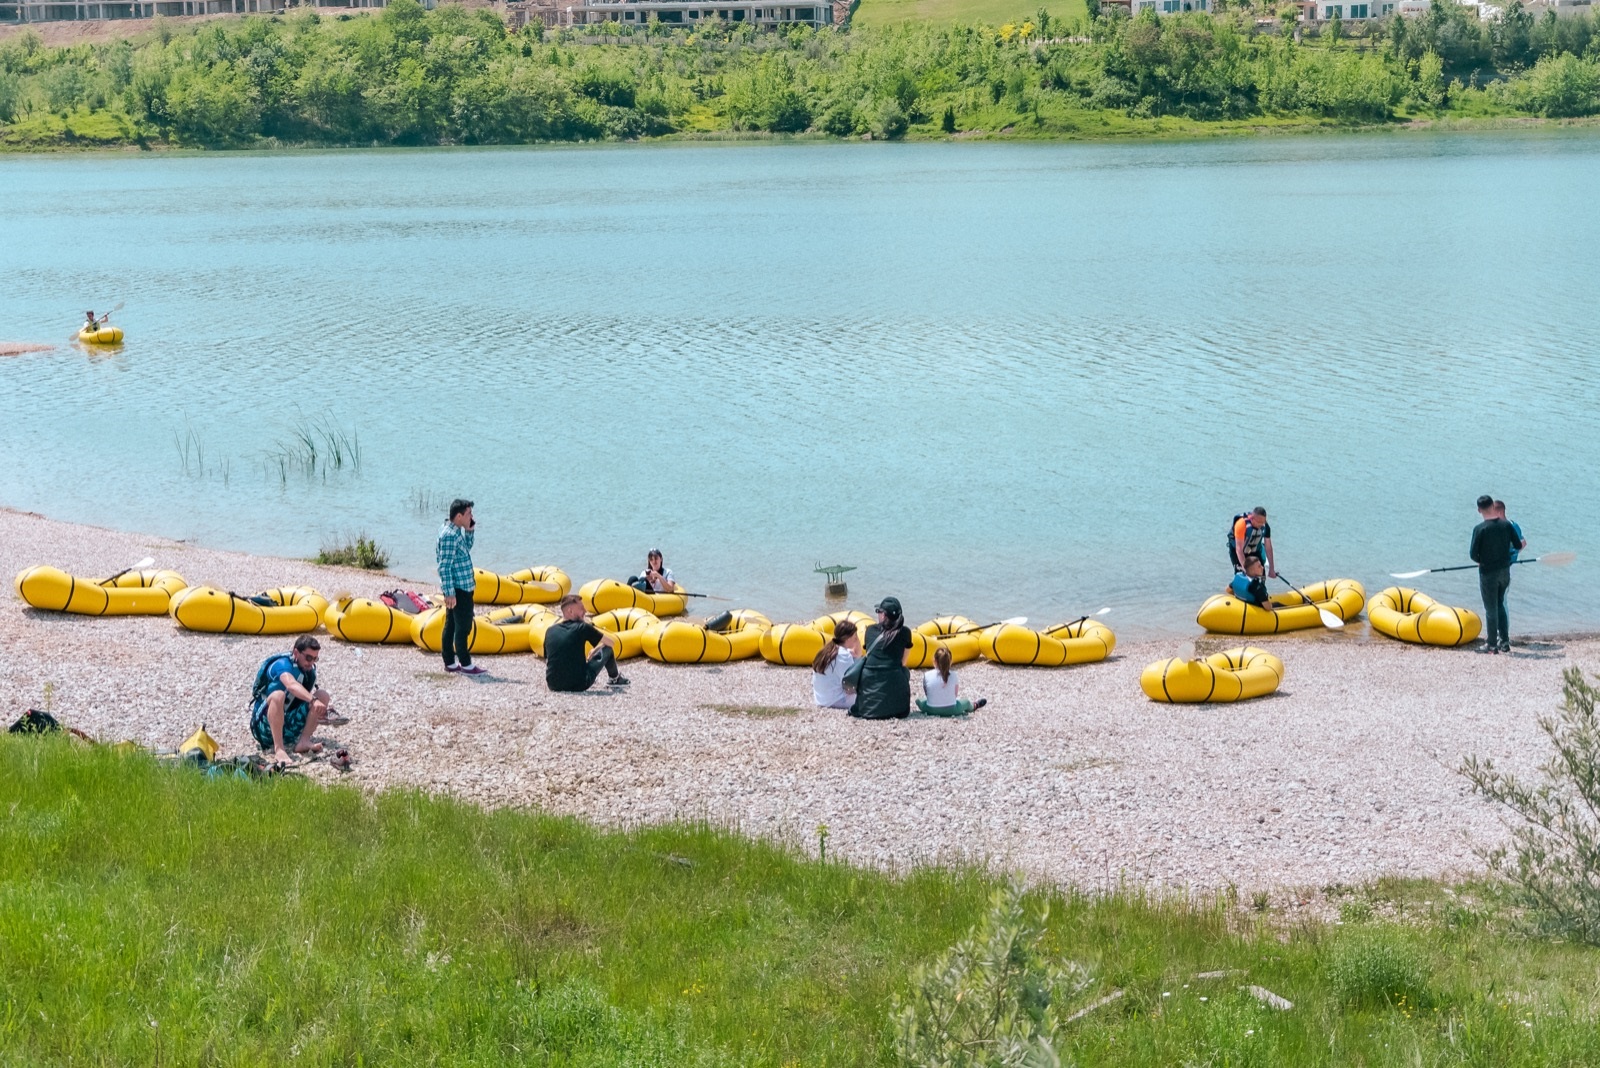 Packrafting event